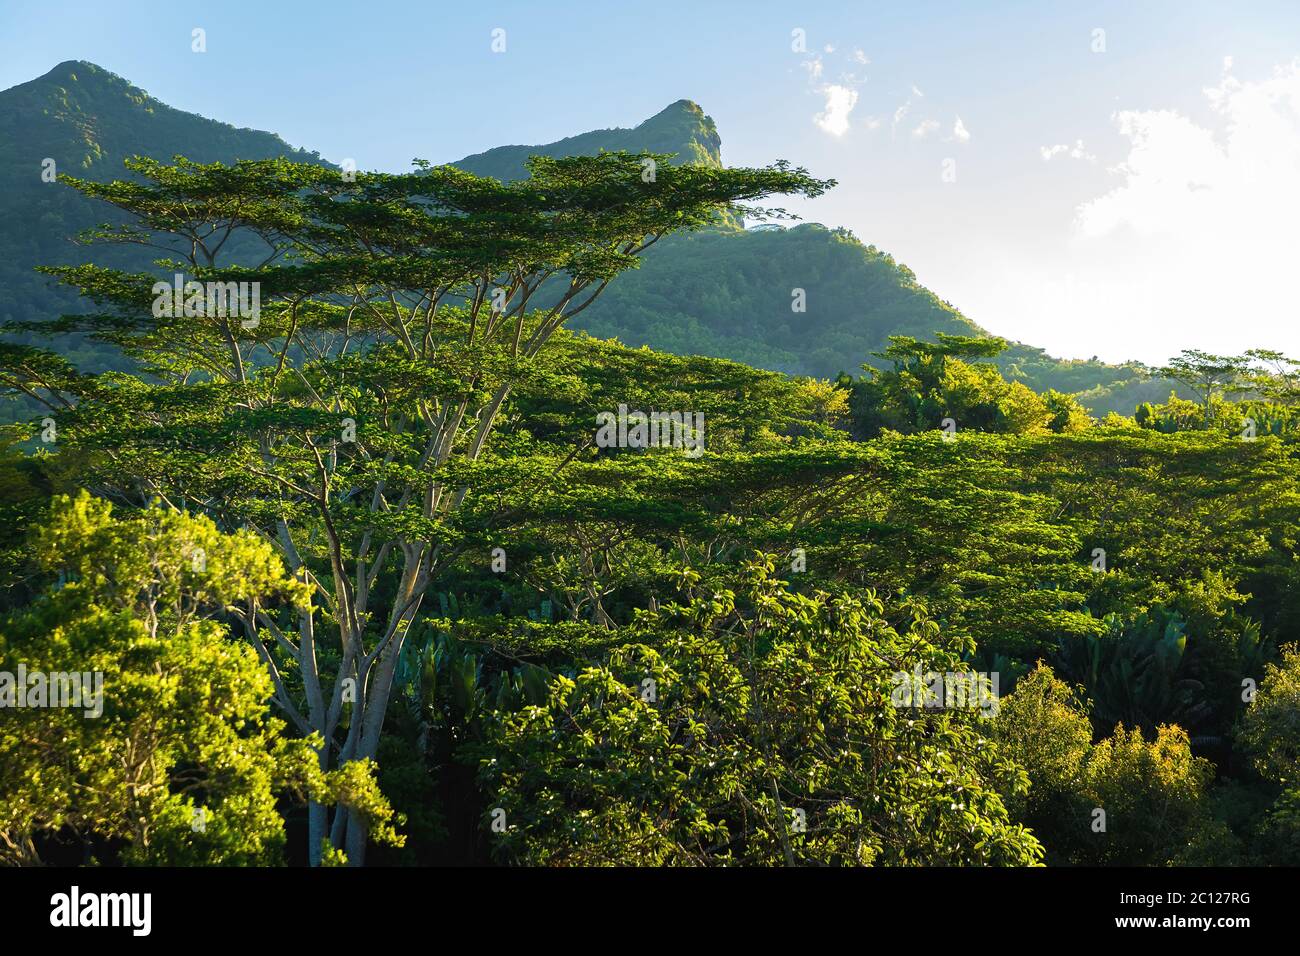 Rain forest, tree crowns and mountain in Mauritius island Stock Photo